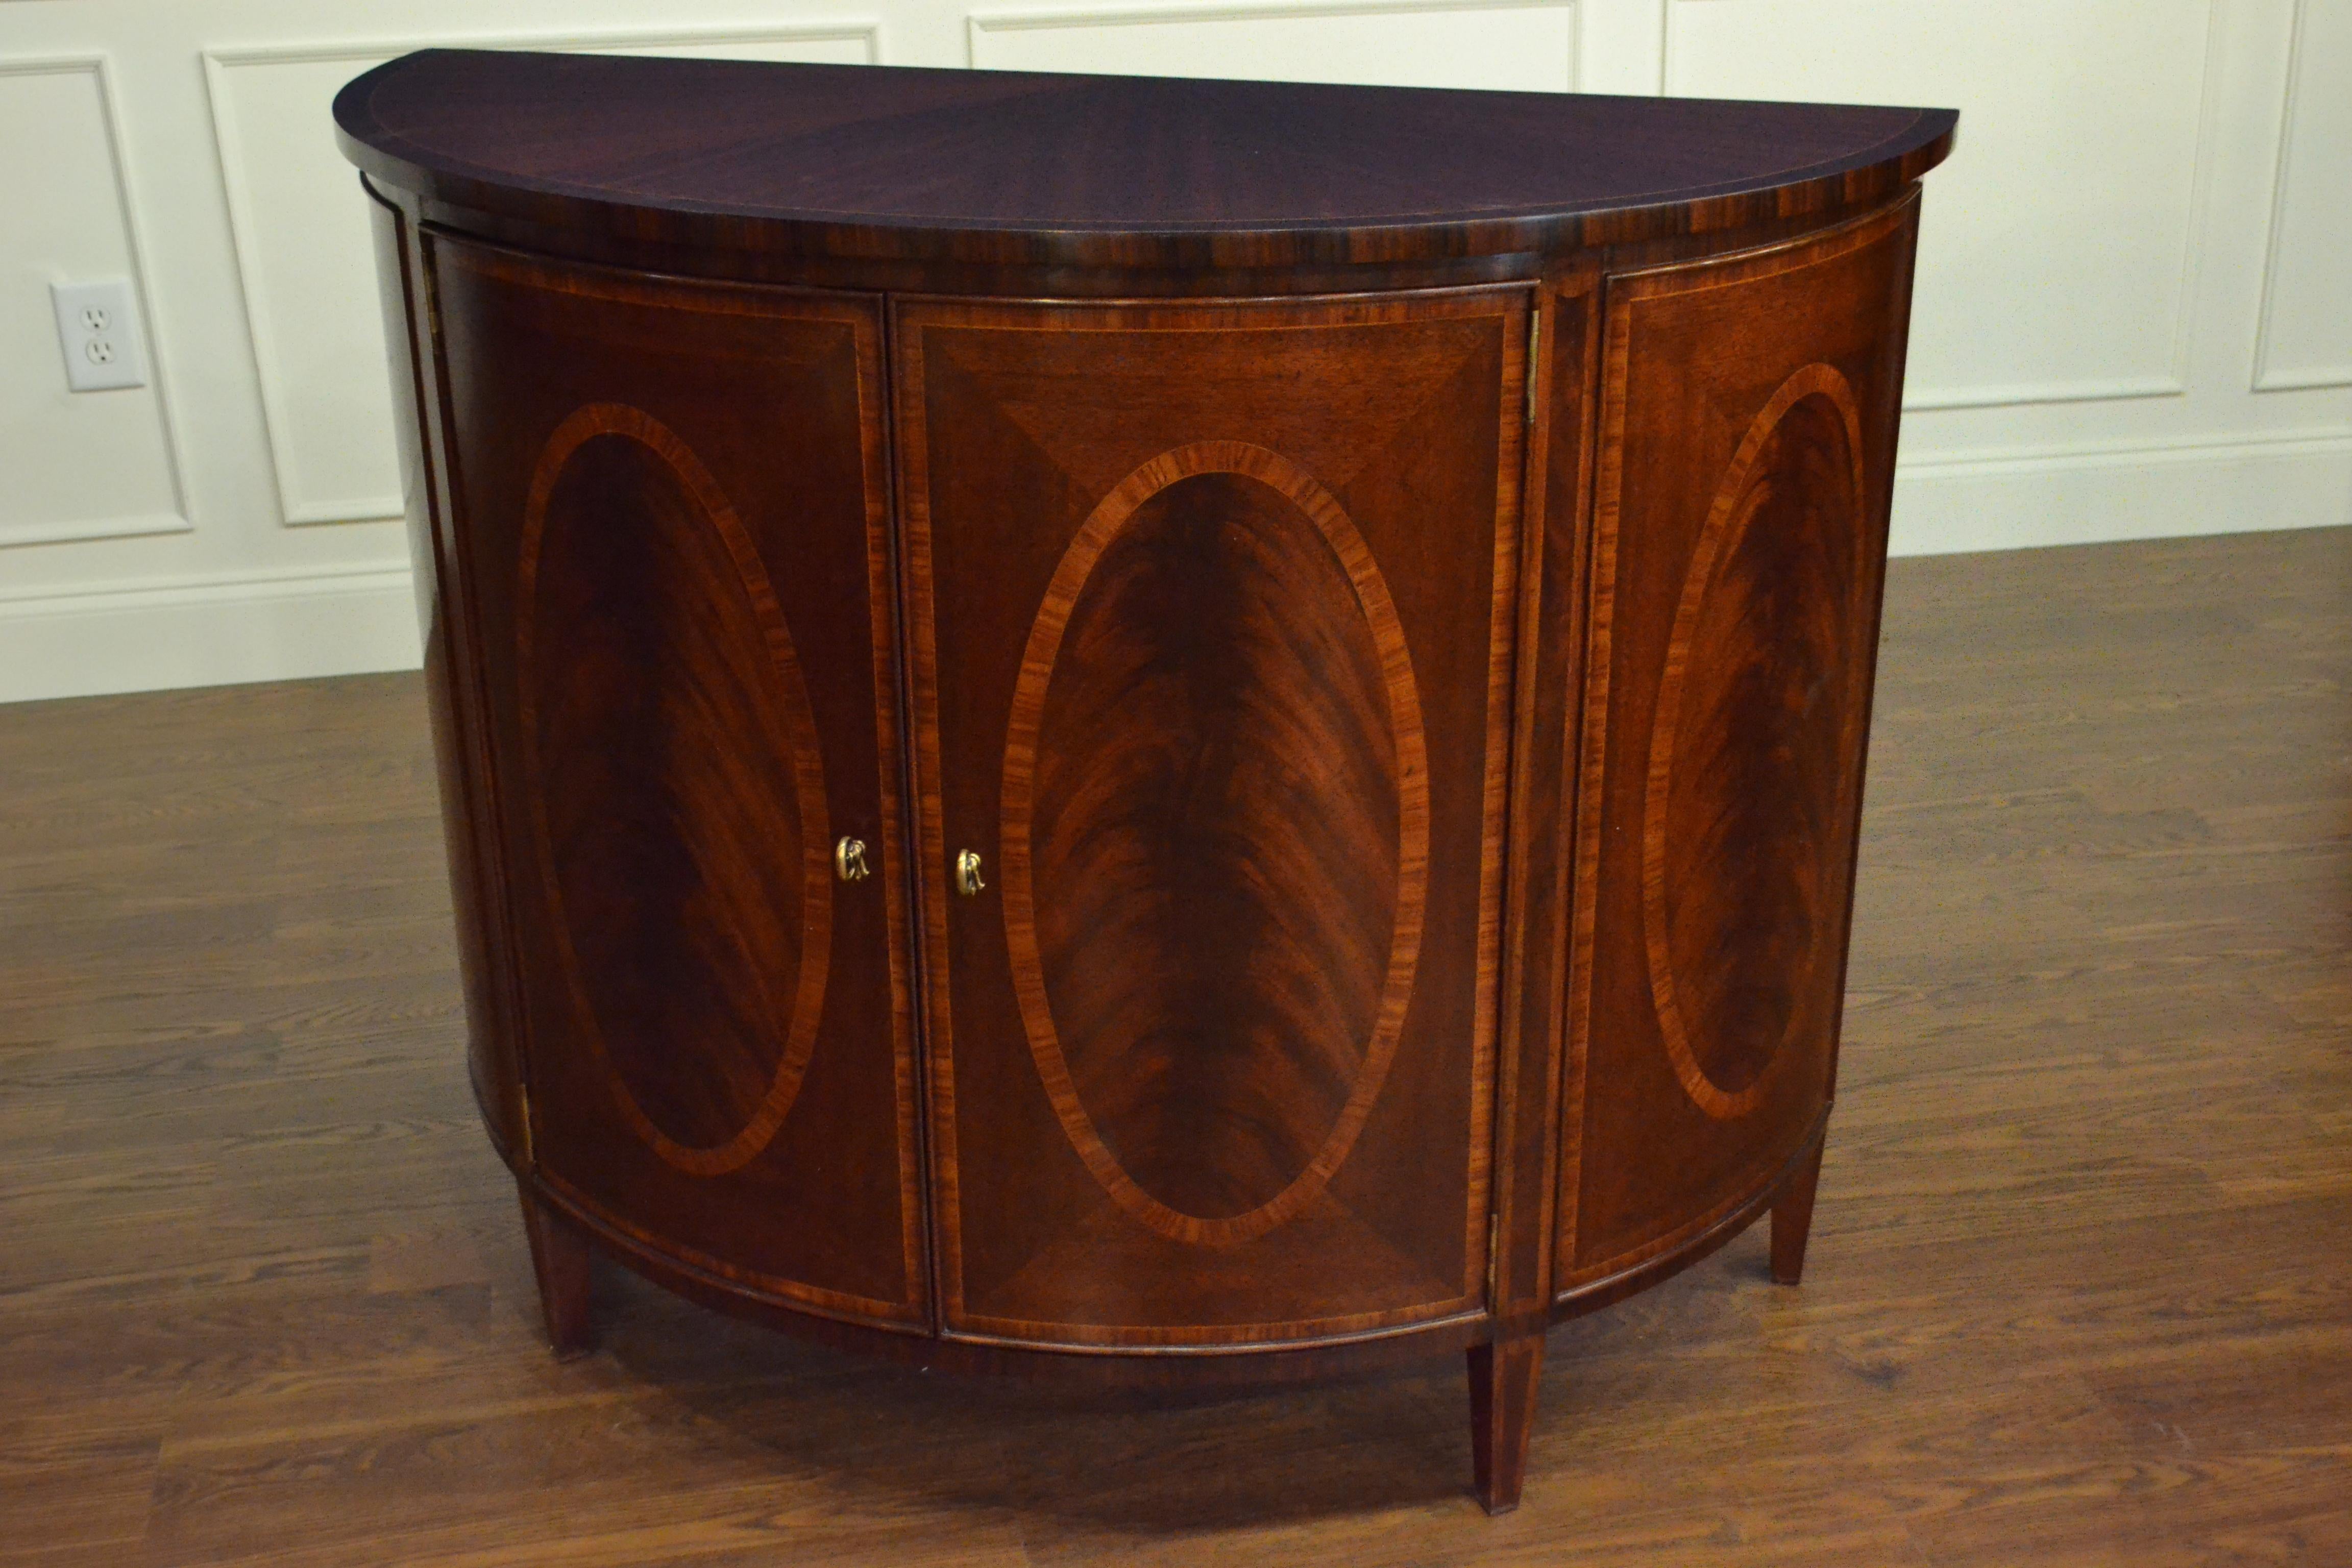 Contemporary Hepplewhite Style Mahogany Demilune Cabinet by Leighton Hall For Sale